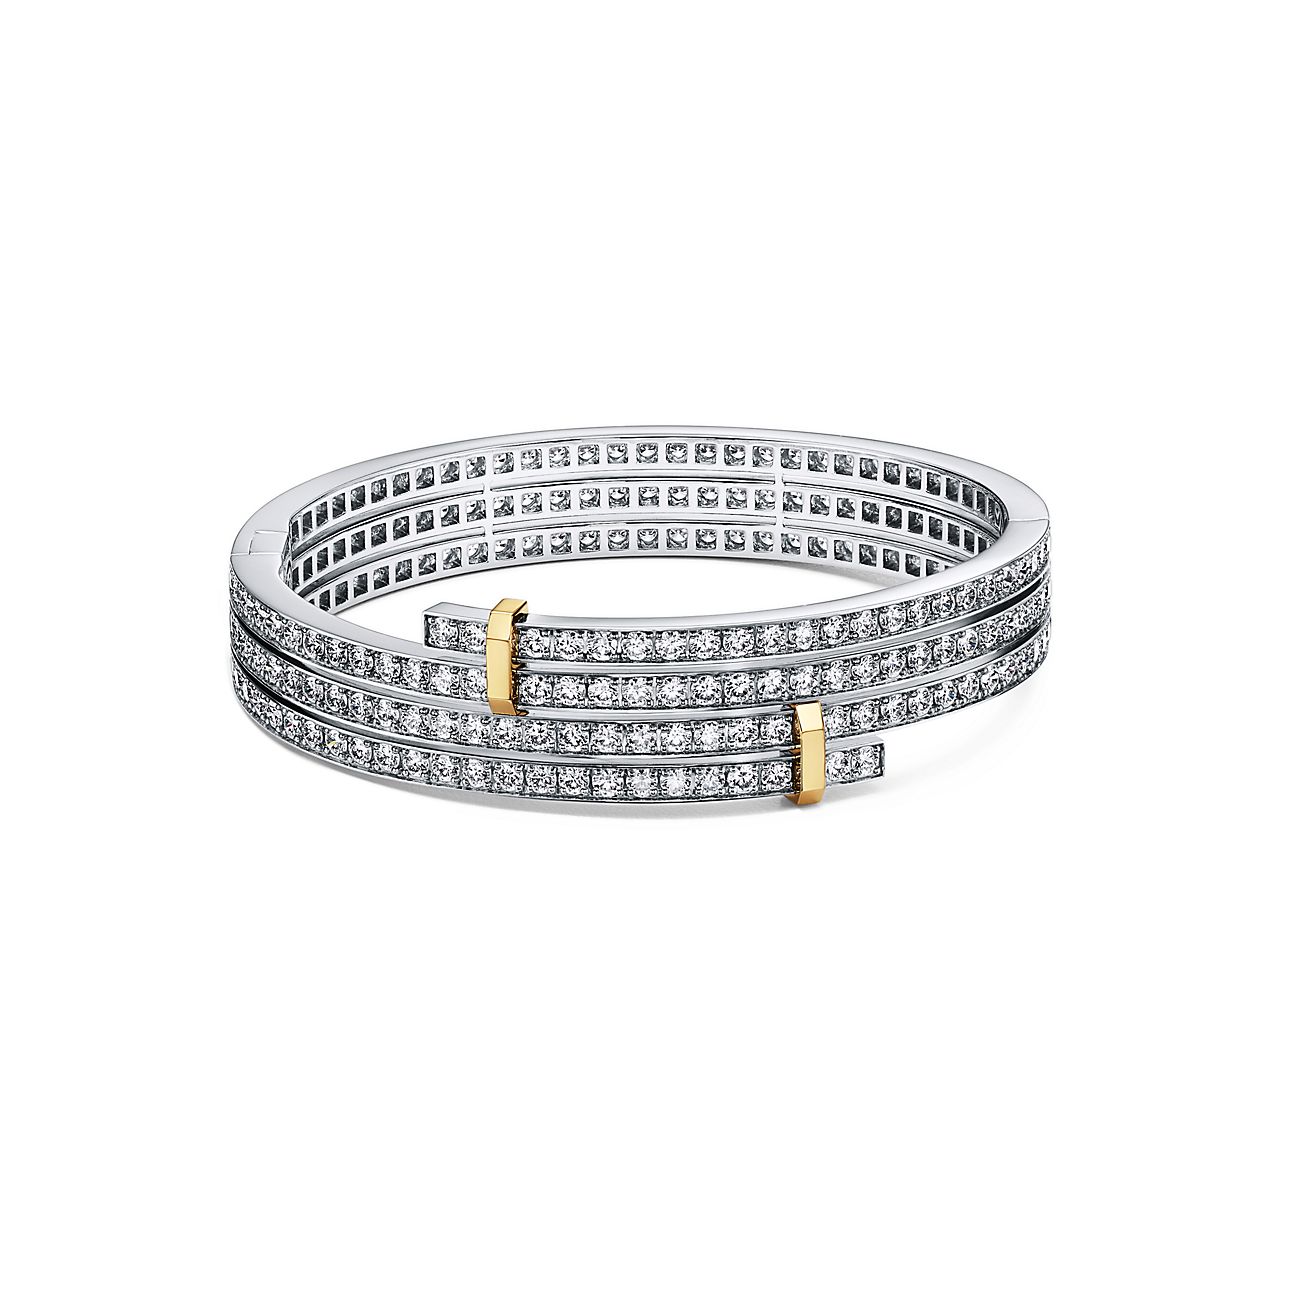 Tiffany EdgeMulti-row Bypass Bracelet
in Platinum and Yellow Gold with Diamonds